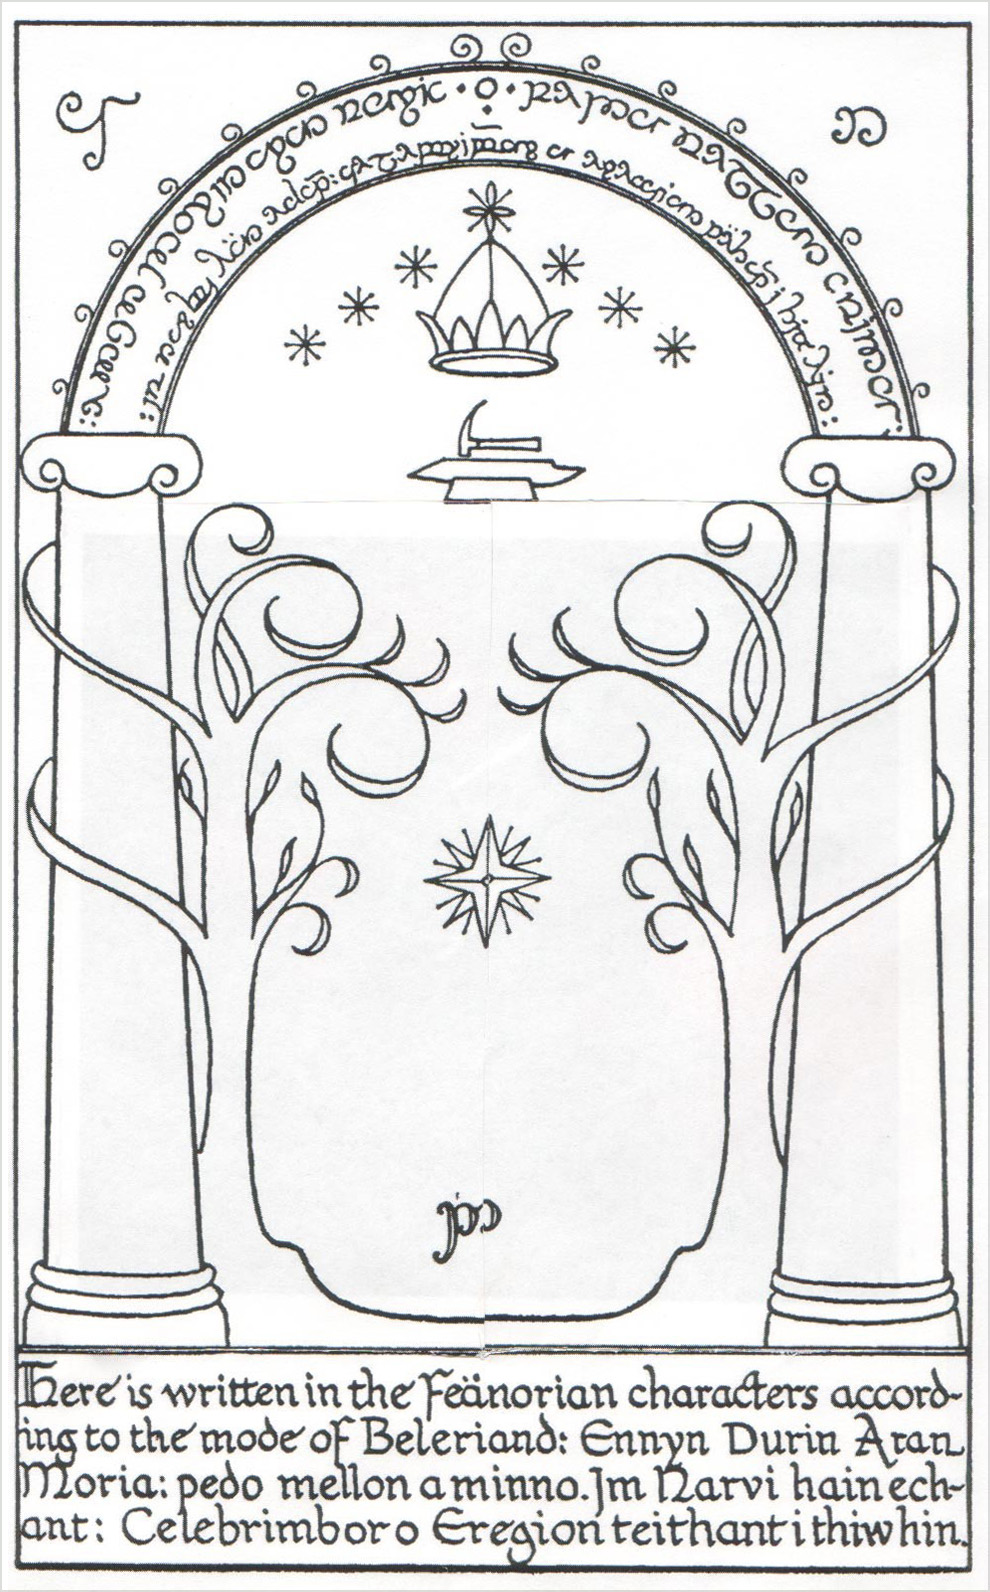 <i>Moria: The Doors of Durin</i>

<br/><br/>

From Hammond and Scull, the version below (that everyone recognises) is an image created by a printer’s artist, this was taken from Tolkien’s final version. The trees are larger twirling around the columns and lower branches complete, see below.

<br/><br/>

Crayon drawing reproduced in the Fellowship of the Ring, Tolkien Calendars in 1973 and 1974.

<br/><br/>

Gandalf translates the words in the arch to the others of the Fellowship: “The Doors of Durin, Lord of Moria. Speak, friend, and enter. I, Narvi, made them. Celebrimbor of Hollin drew these signs.”<span class="ngViews">1 view</span>